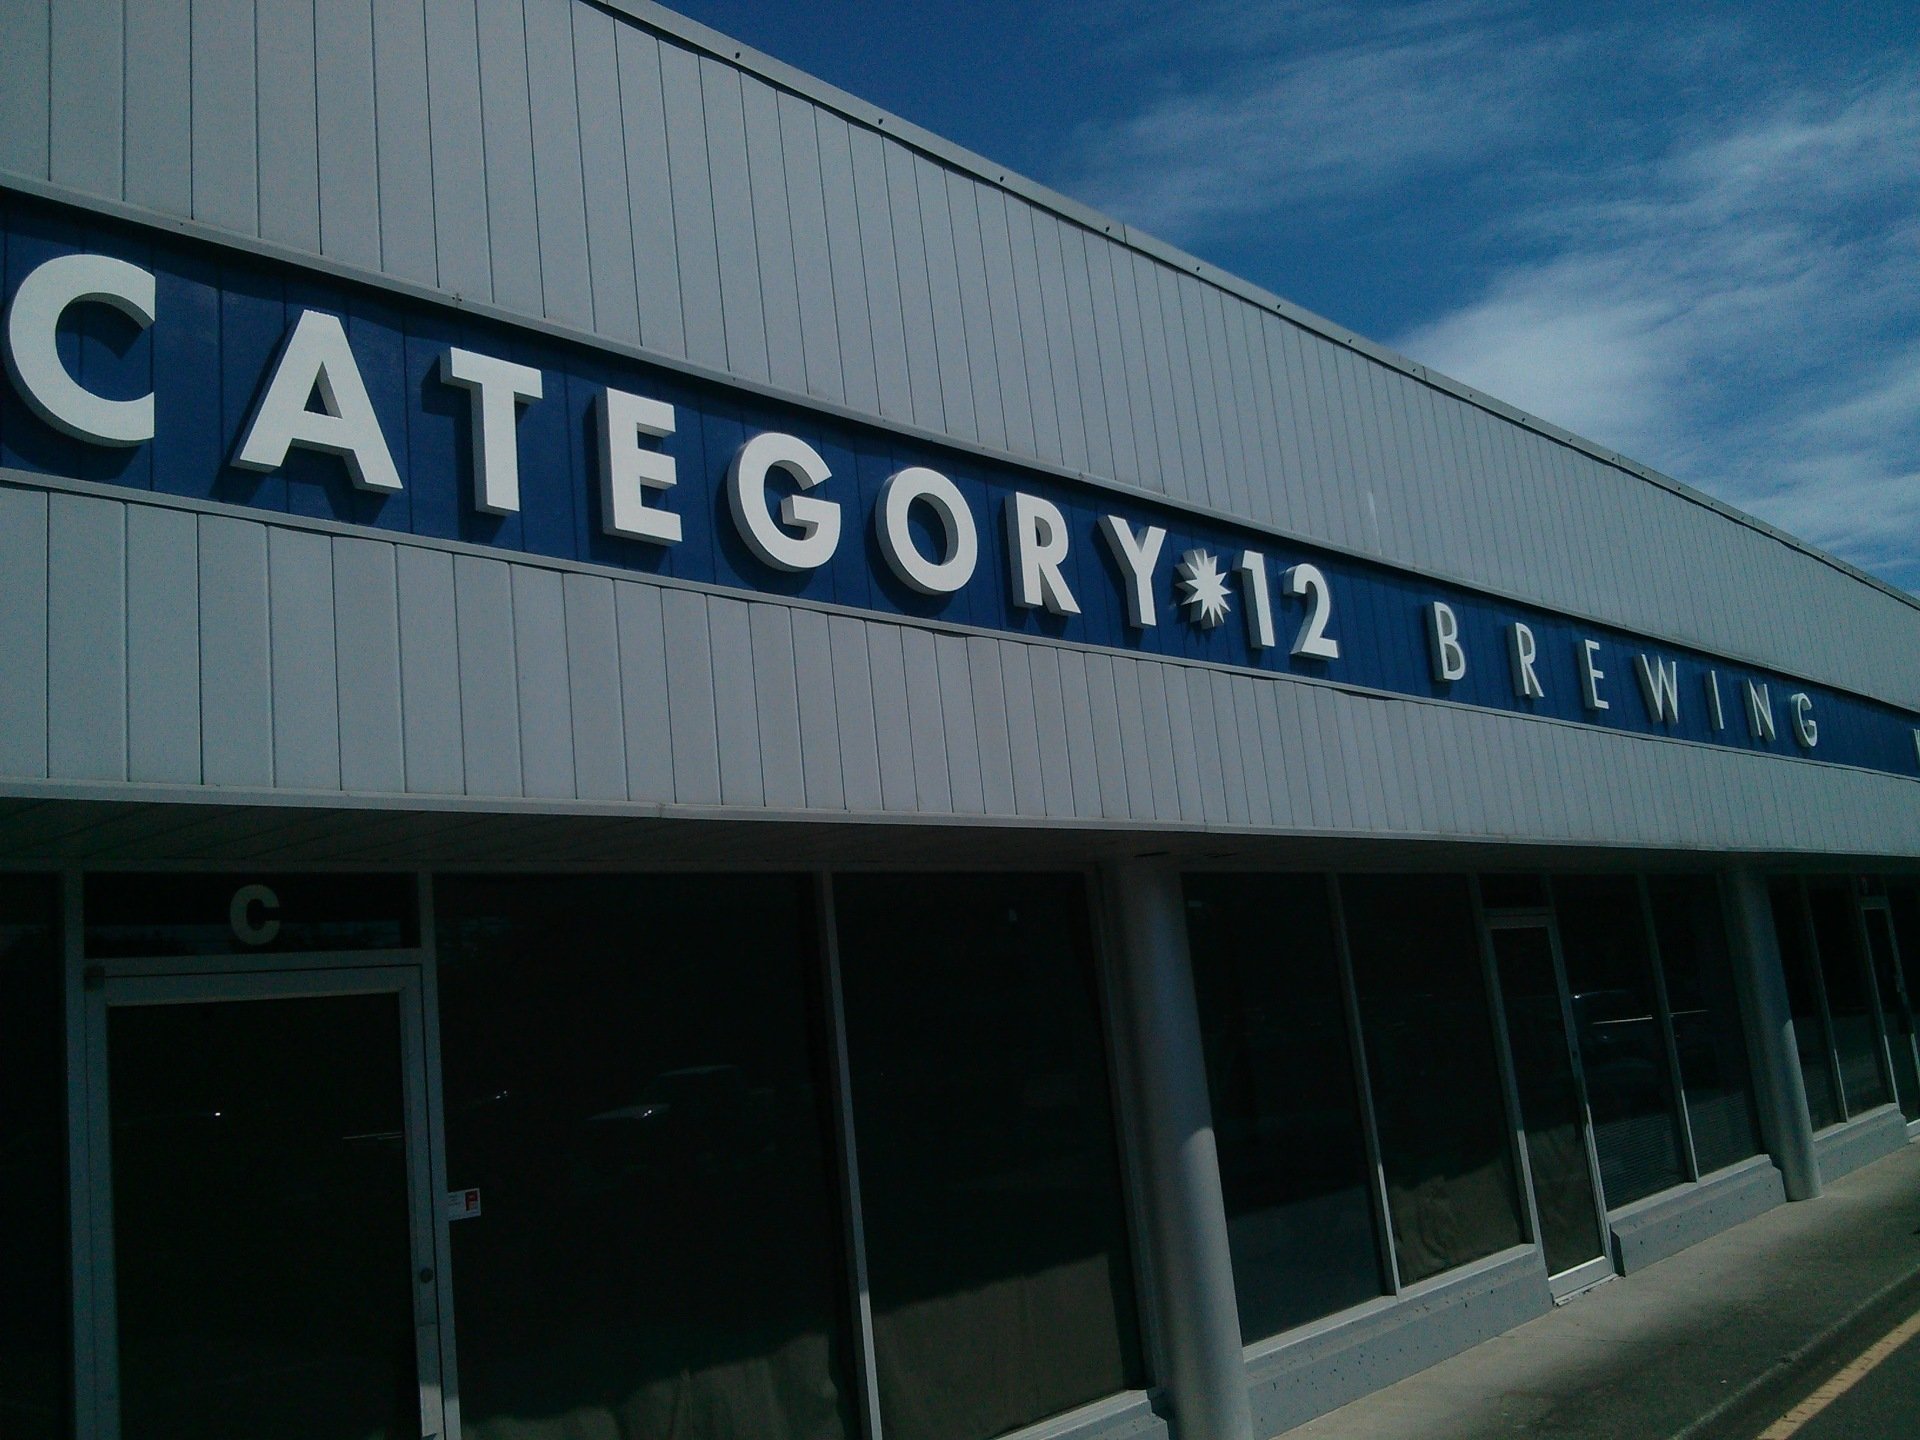 category 12 brewing outdoor 3d letters sign